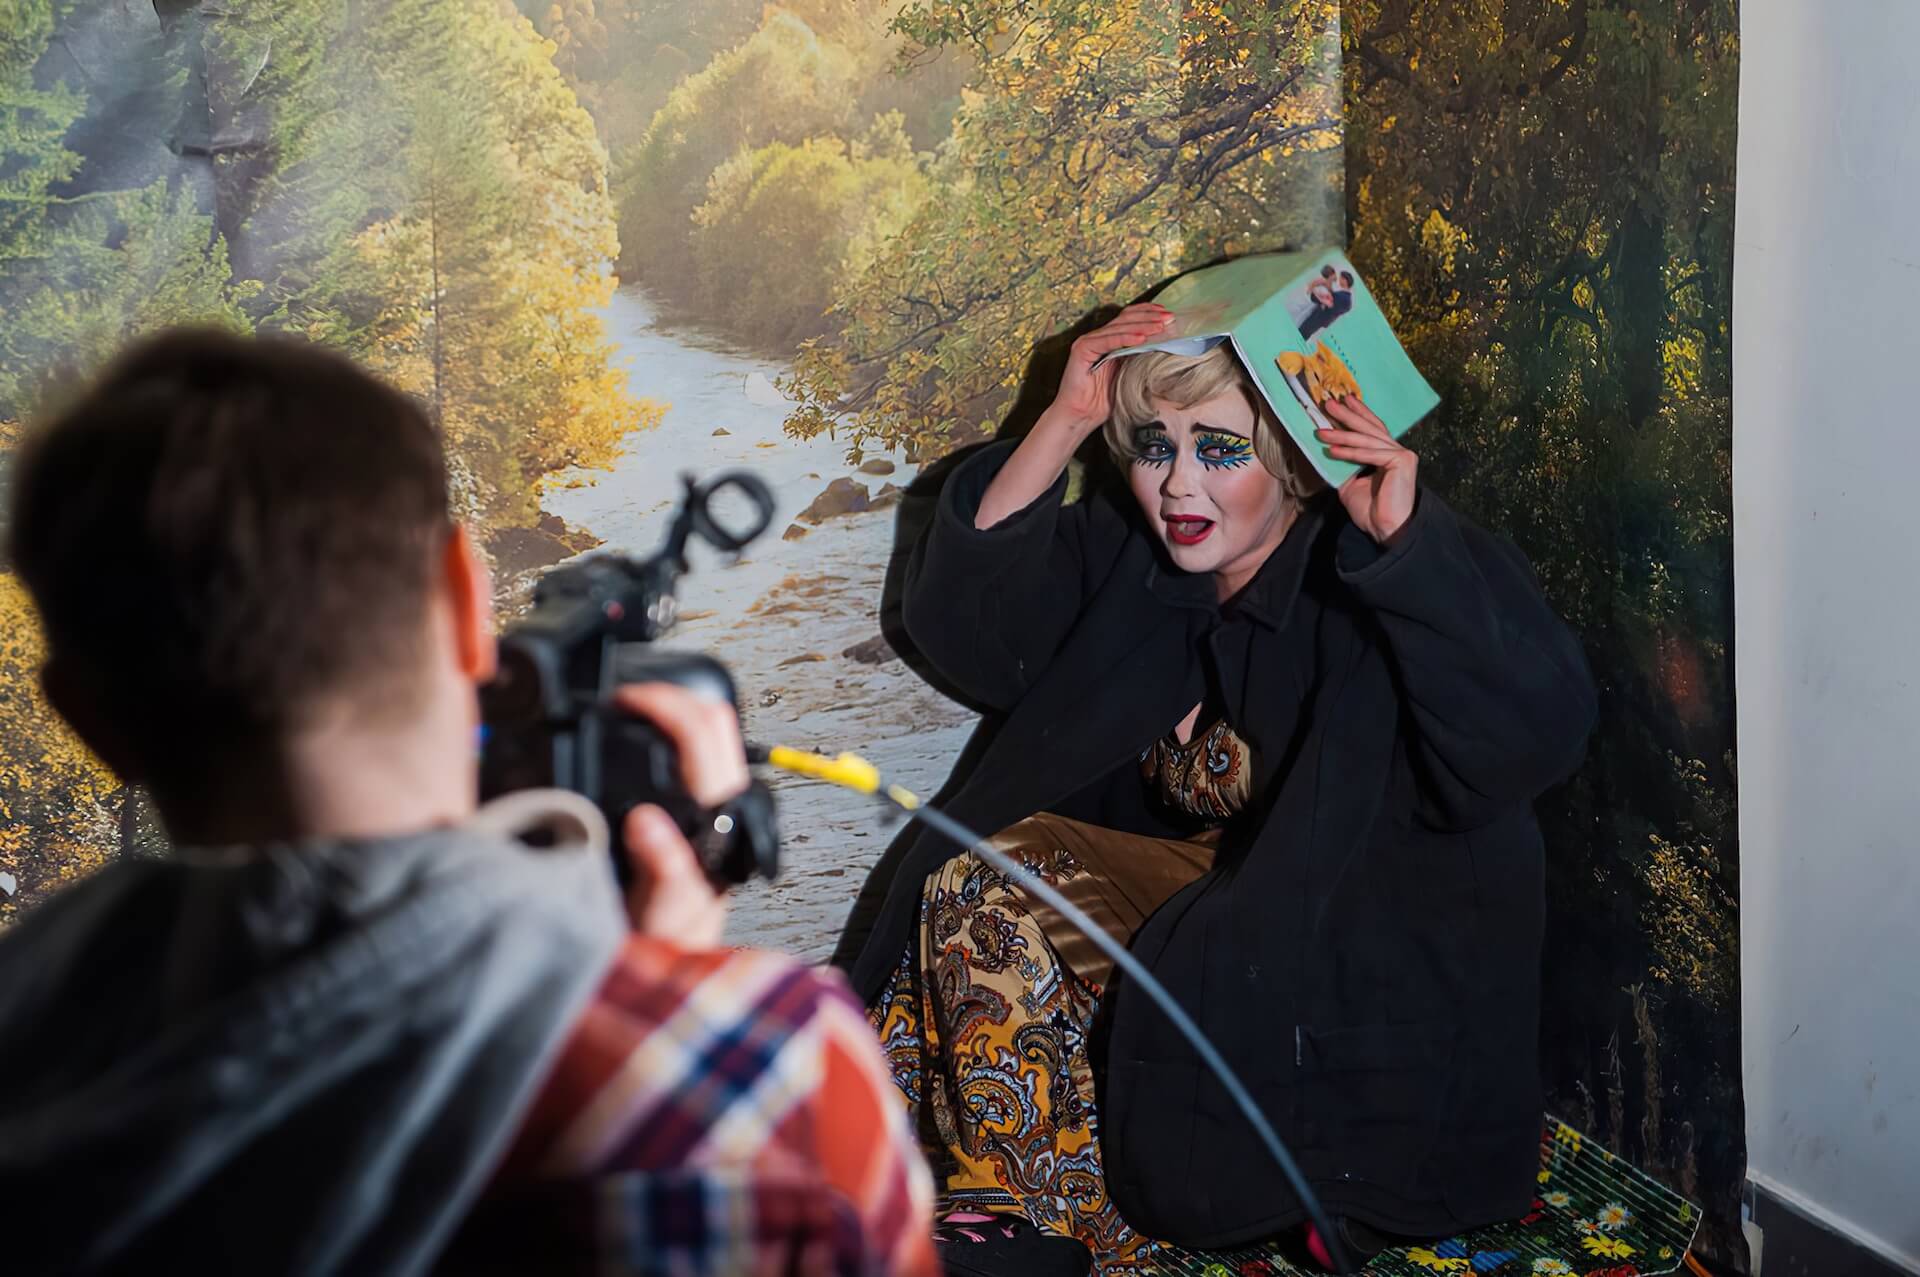 A person filming a woman with a heavy makeup. The woman looks scared and is holding up a book, covering her head.